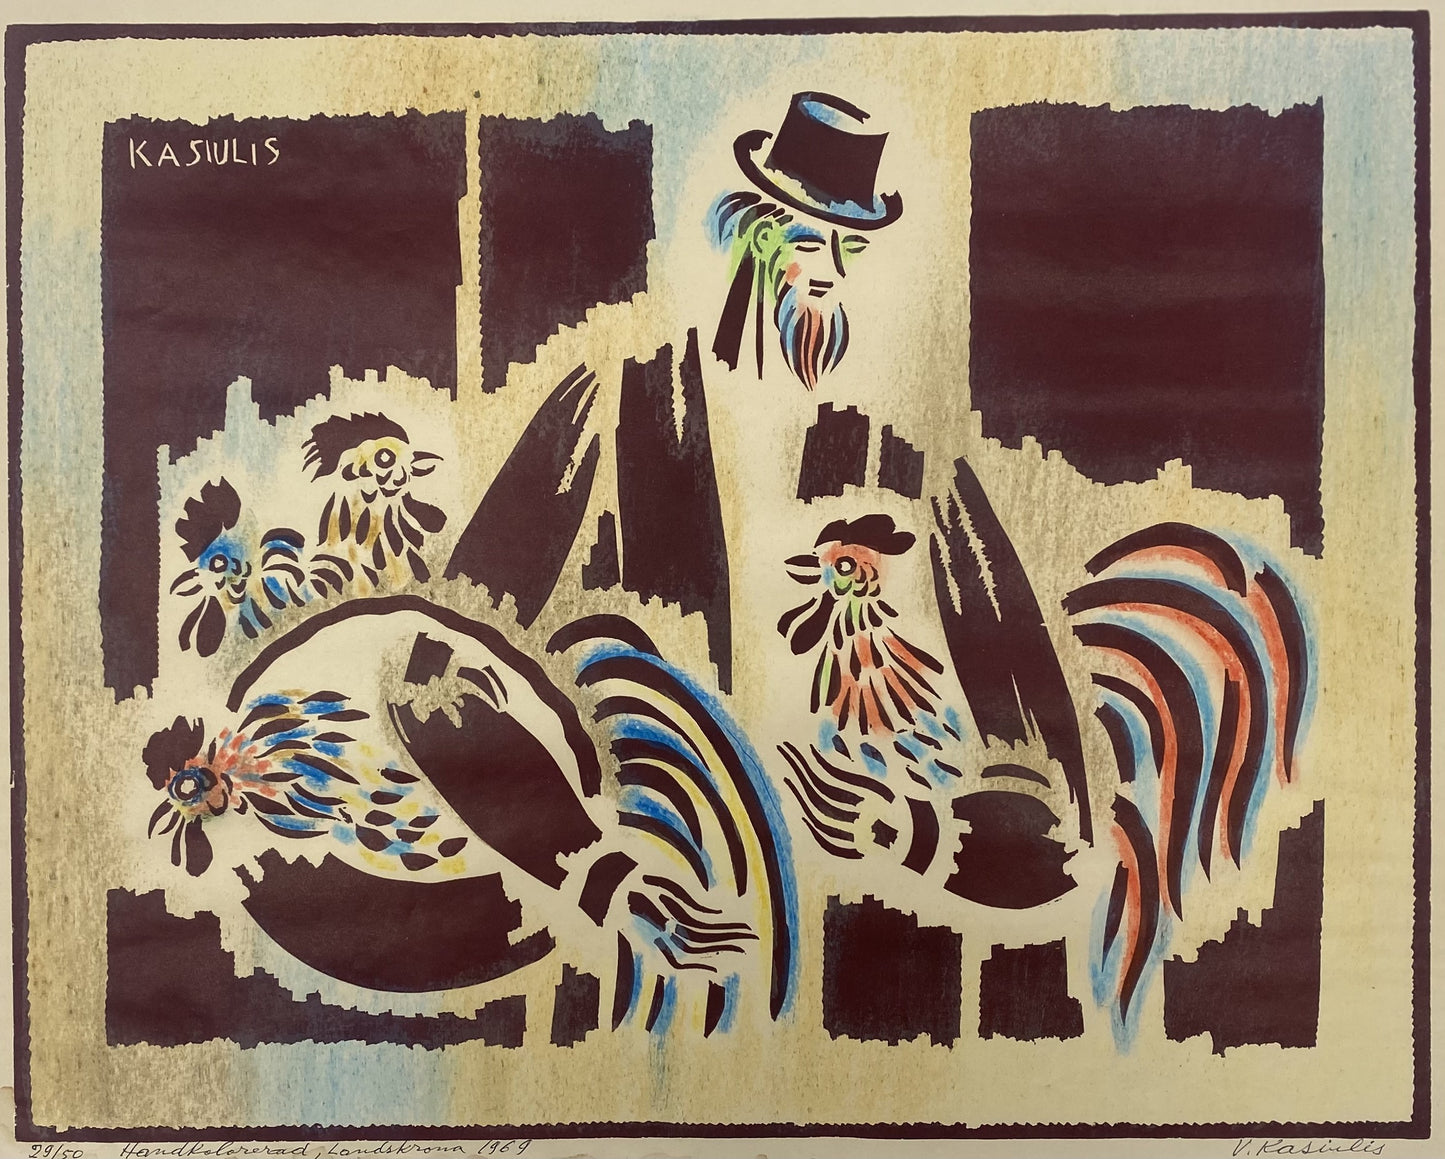 Vytautas Kasiulis | Composition with Roosters, 1969 | Linocut, wax crayons, 44x54 (52x62)